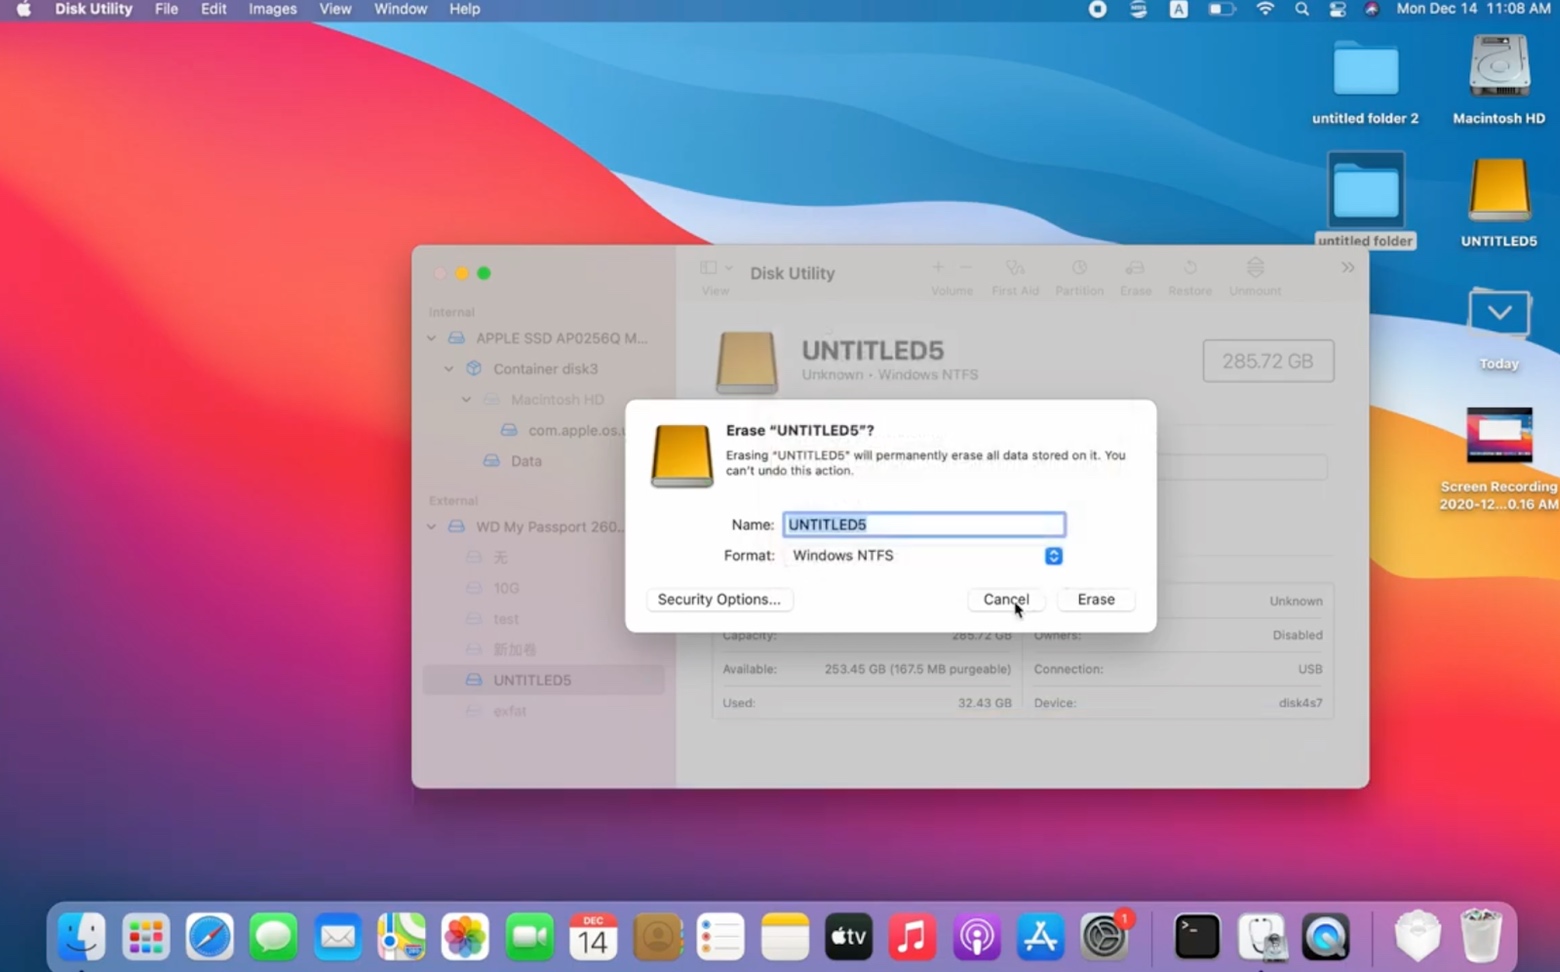 ntfs or exfat for ssd on mac